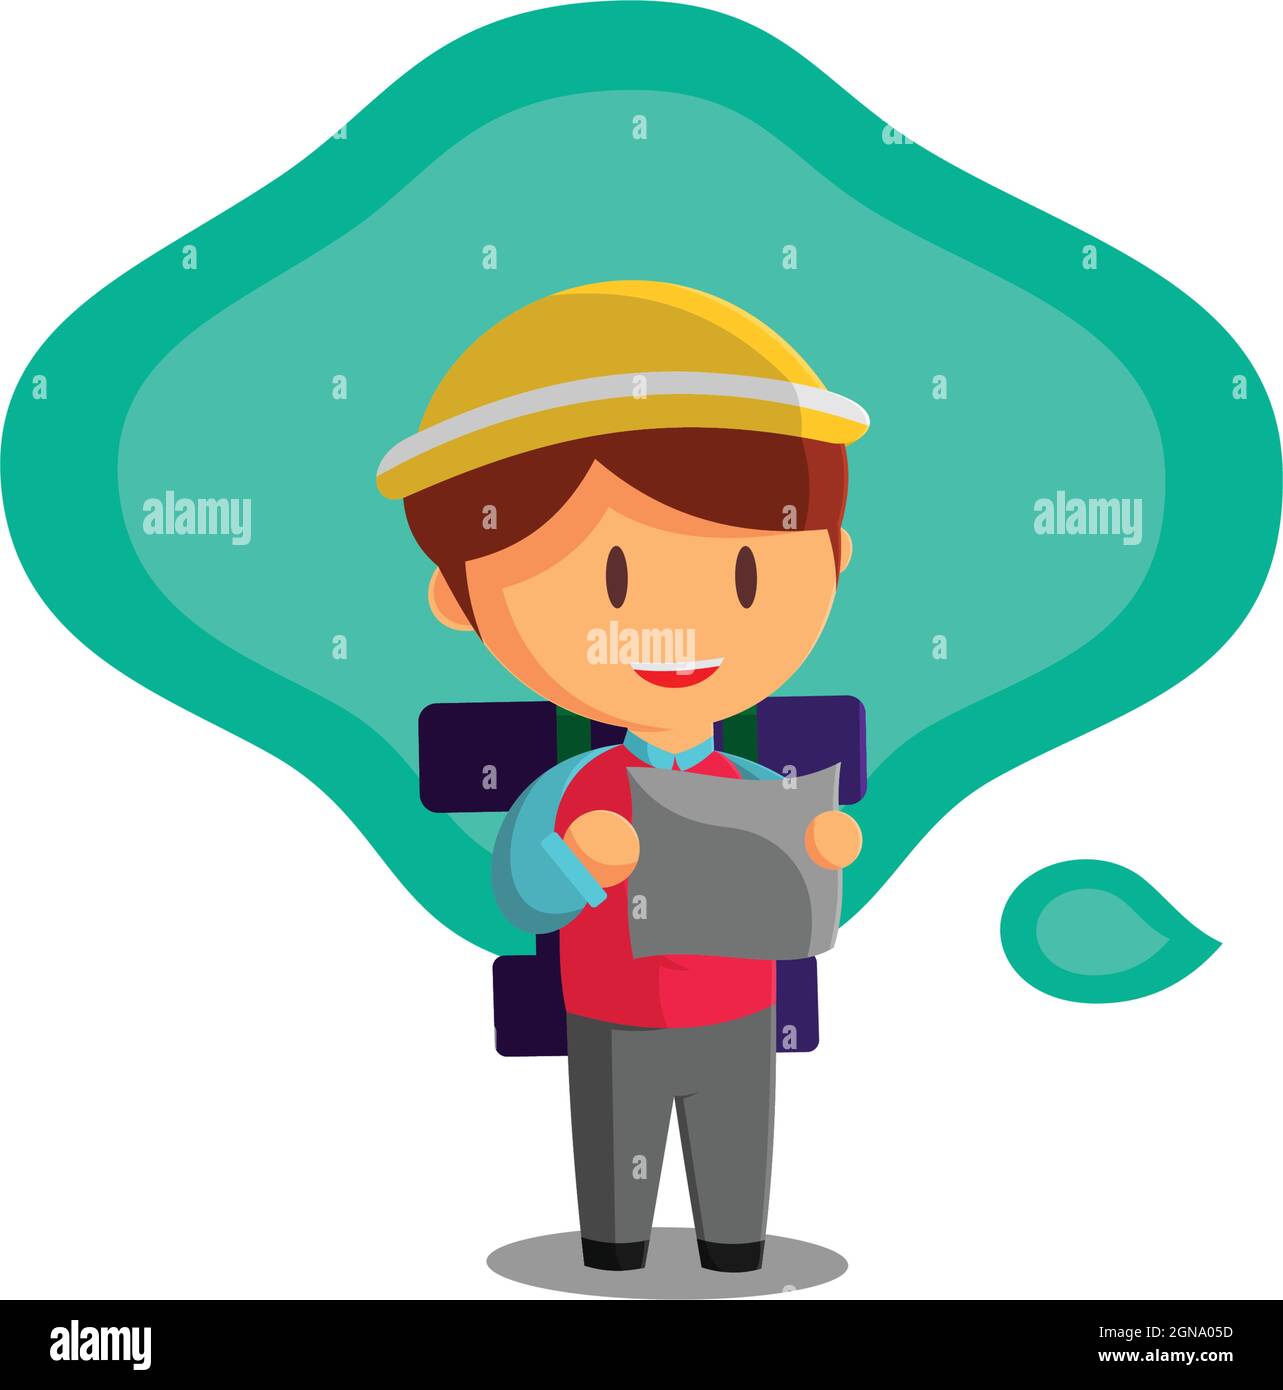 Boy is traveling while looking at the map. Character Vector Illustration on the theme World Tourism Stock Vector